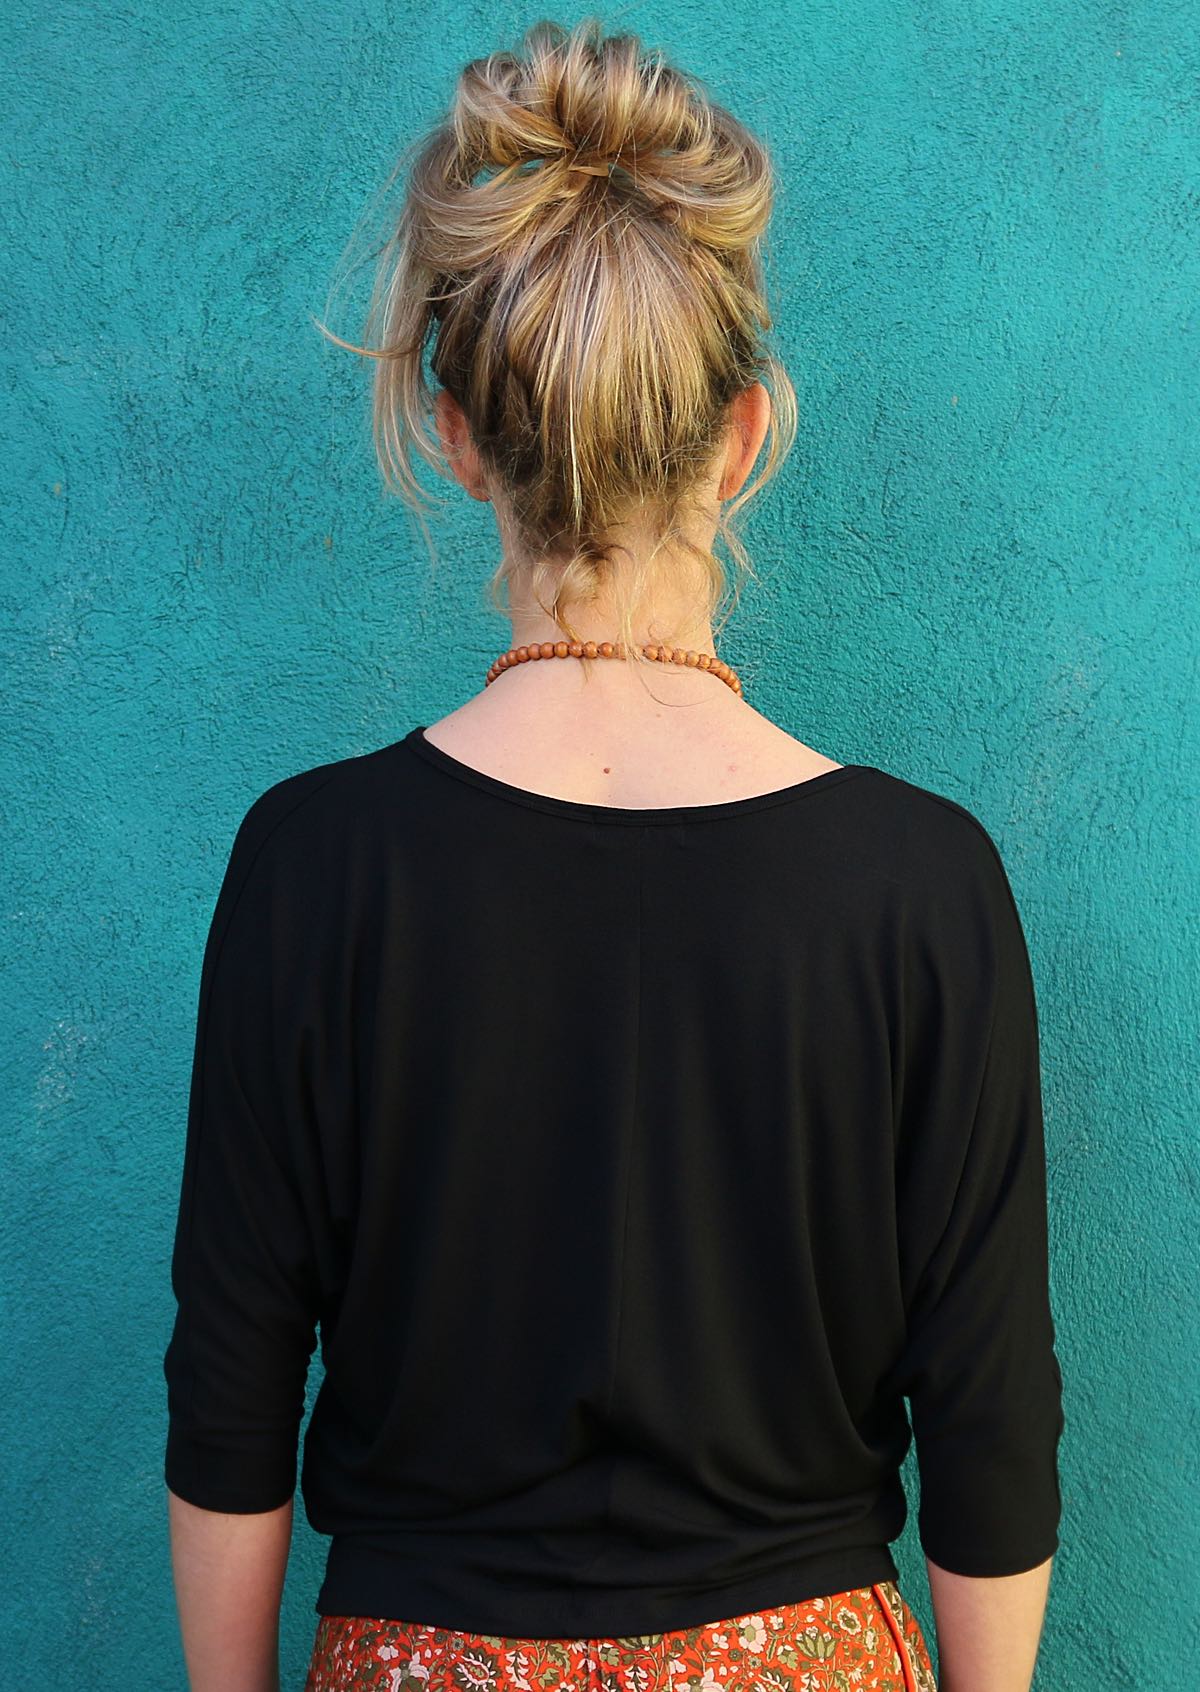 Back view of woman wearing a 3/4 sleeve rayon batwing v-neck black top.